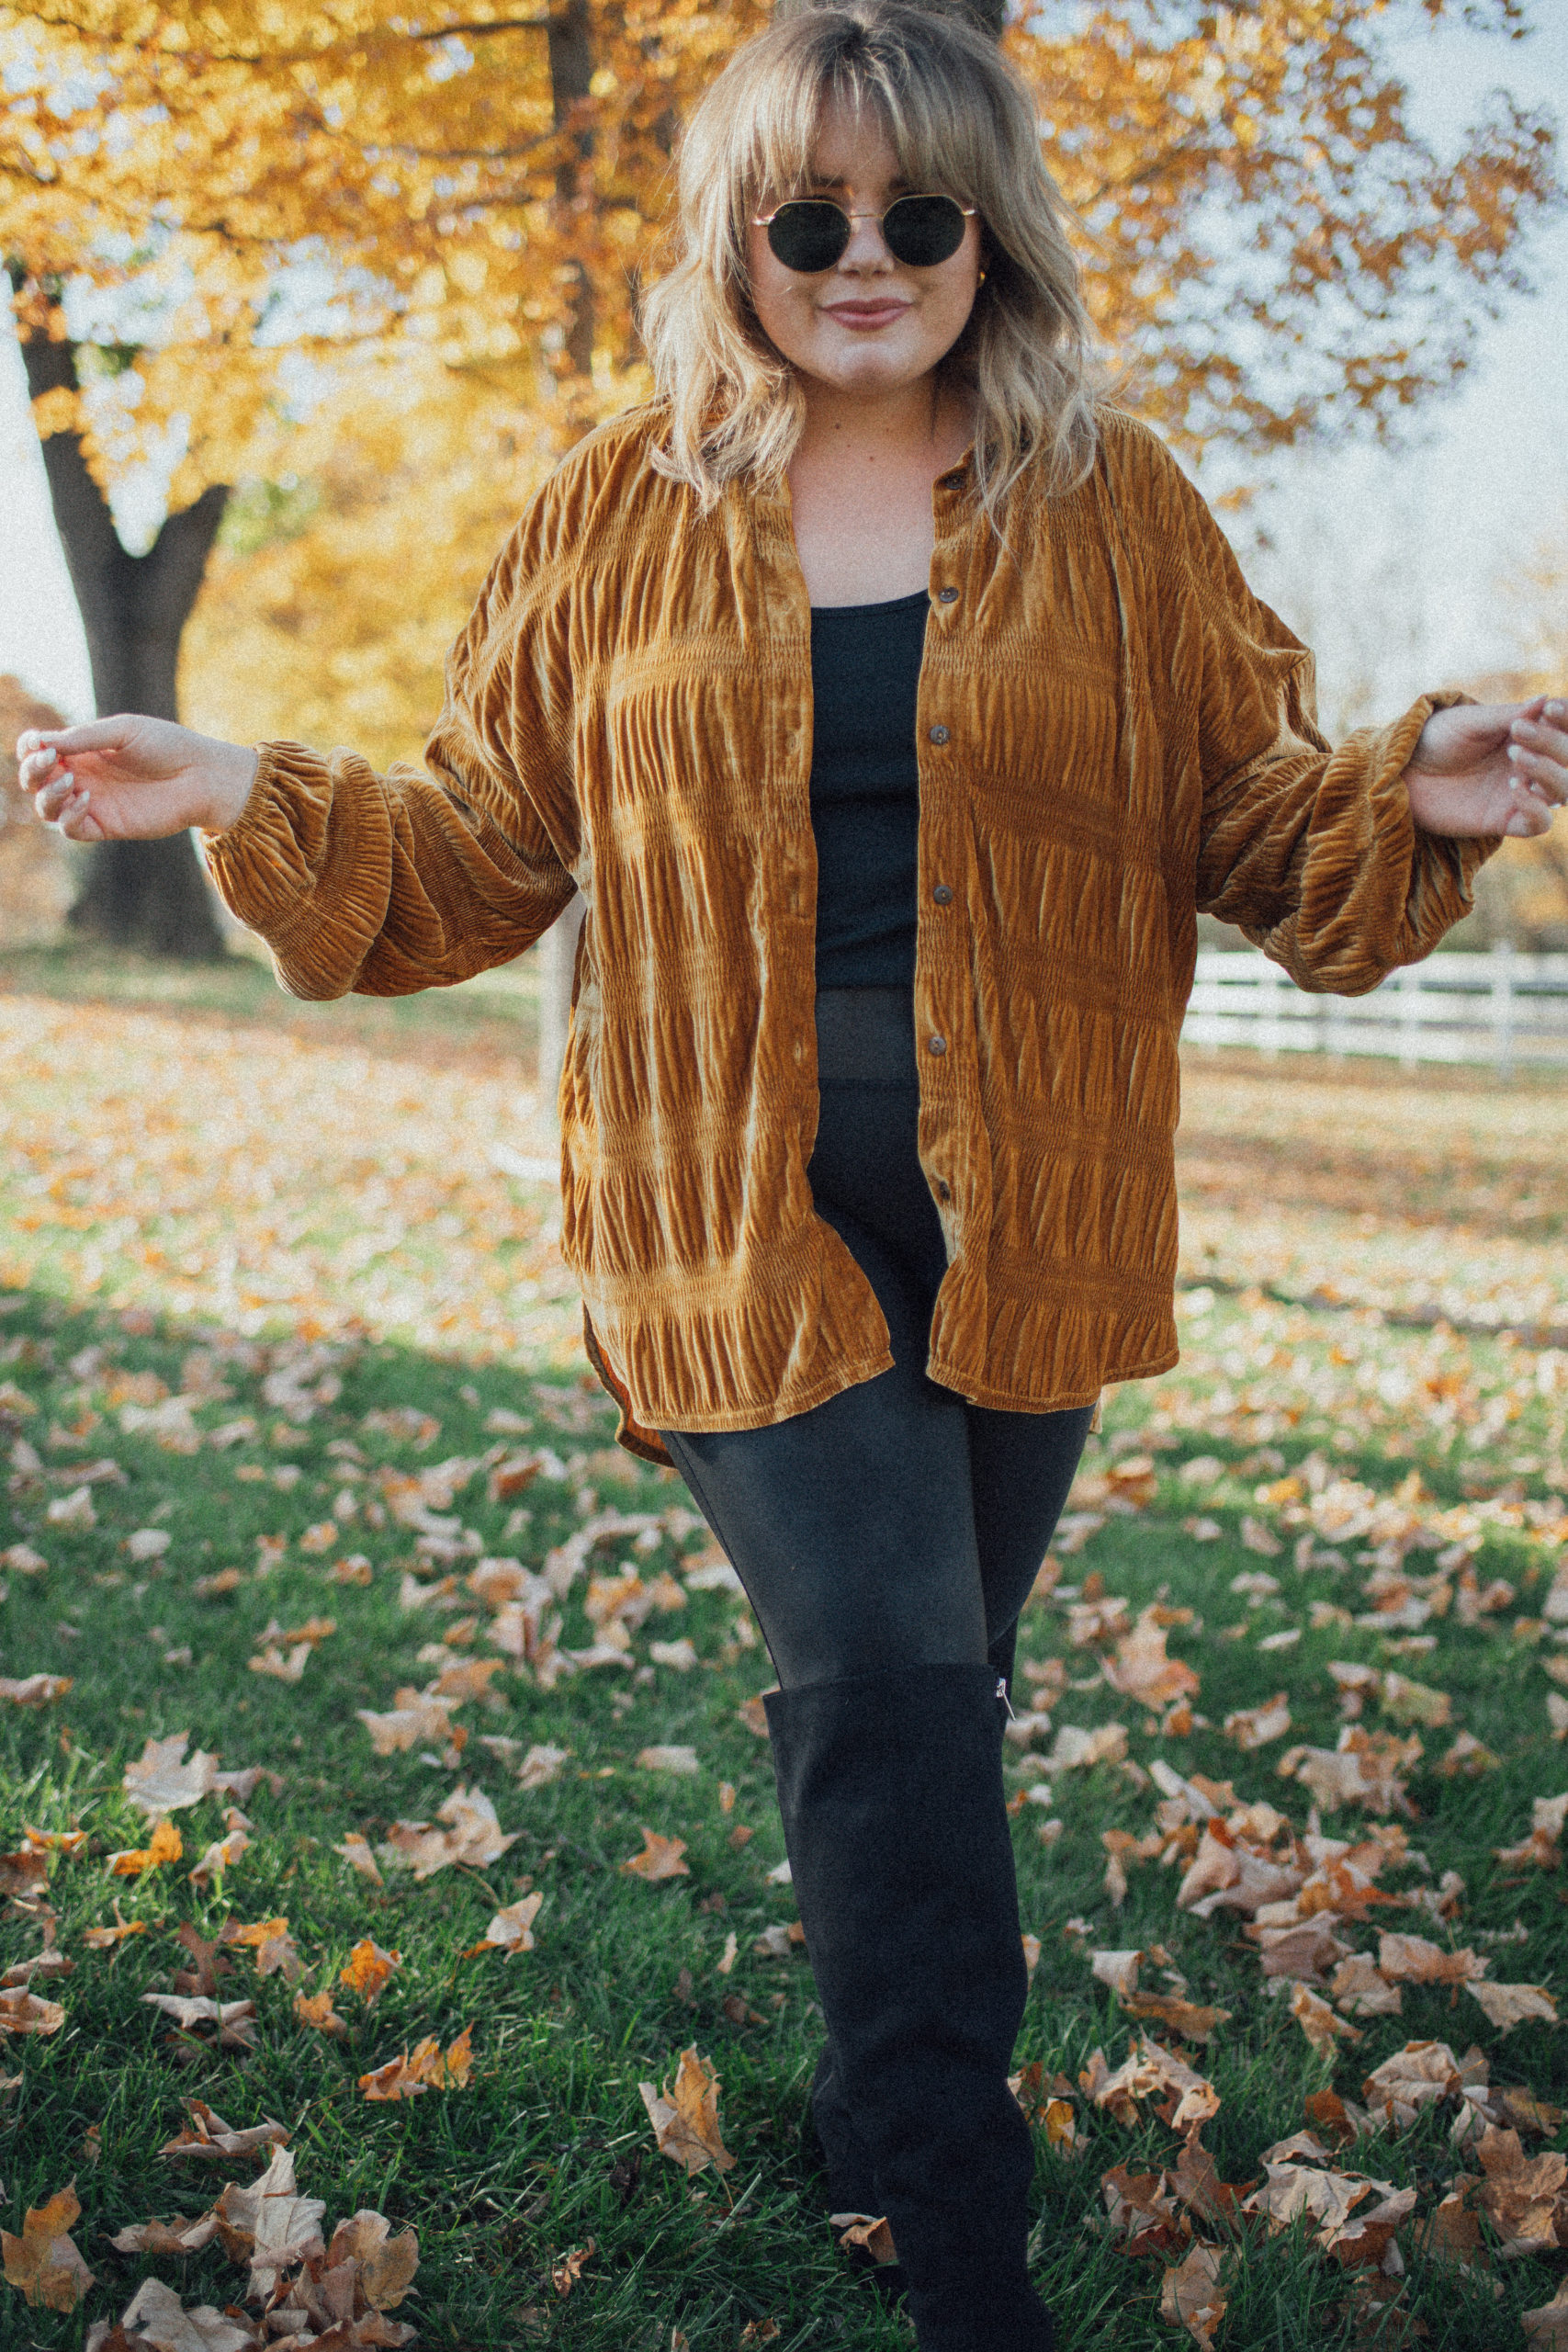 Sharing a cute Thanksgiving outfit that will be so cute and comfortable! Perfect with leggings and a boots for a comfy holiday look! 